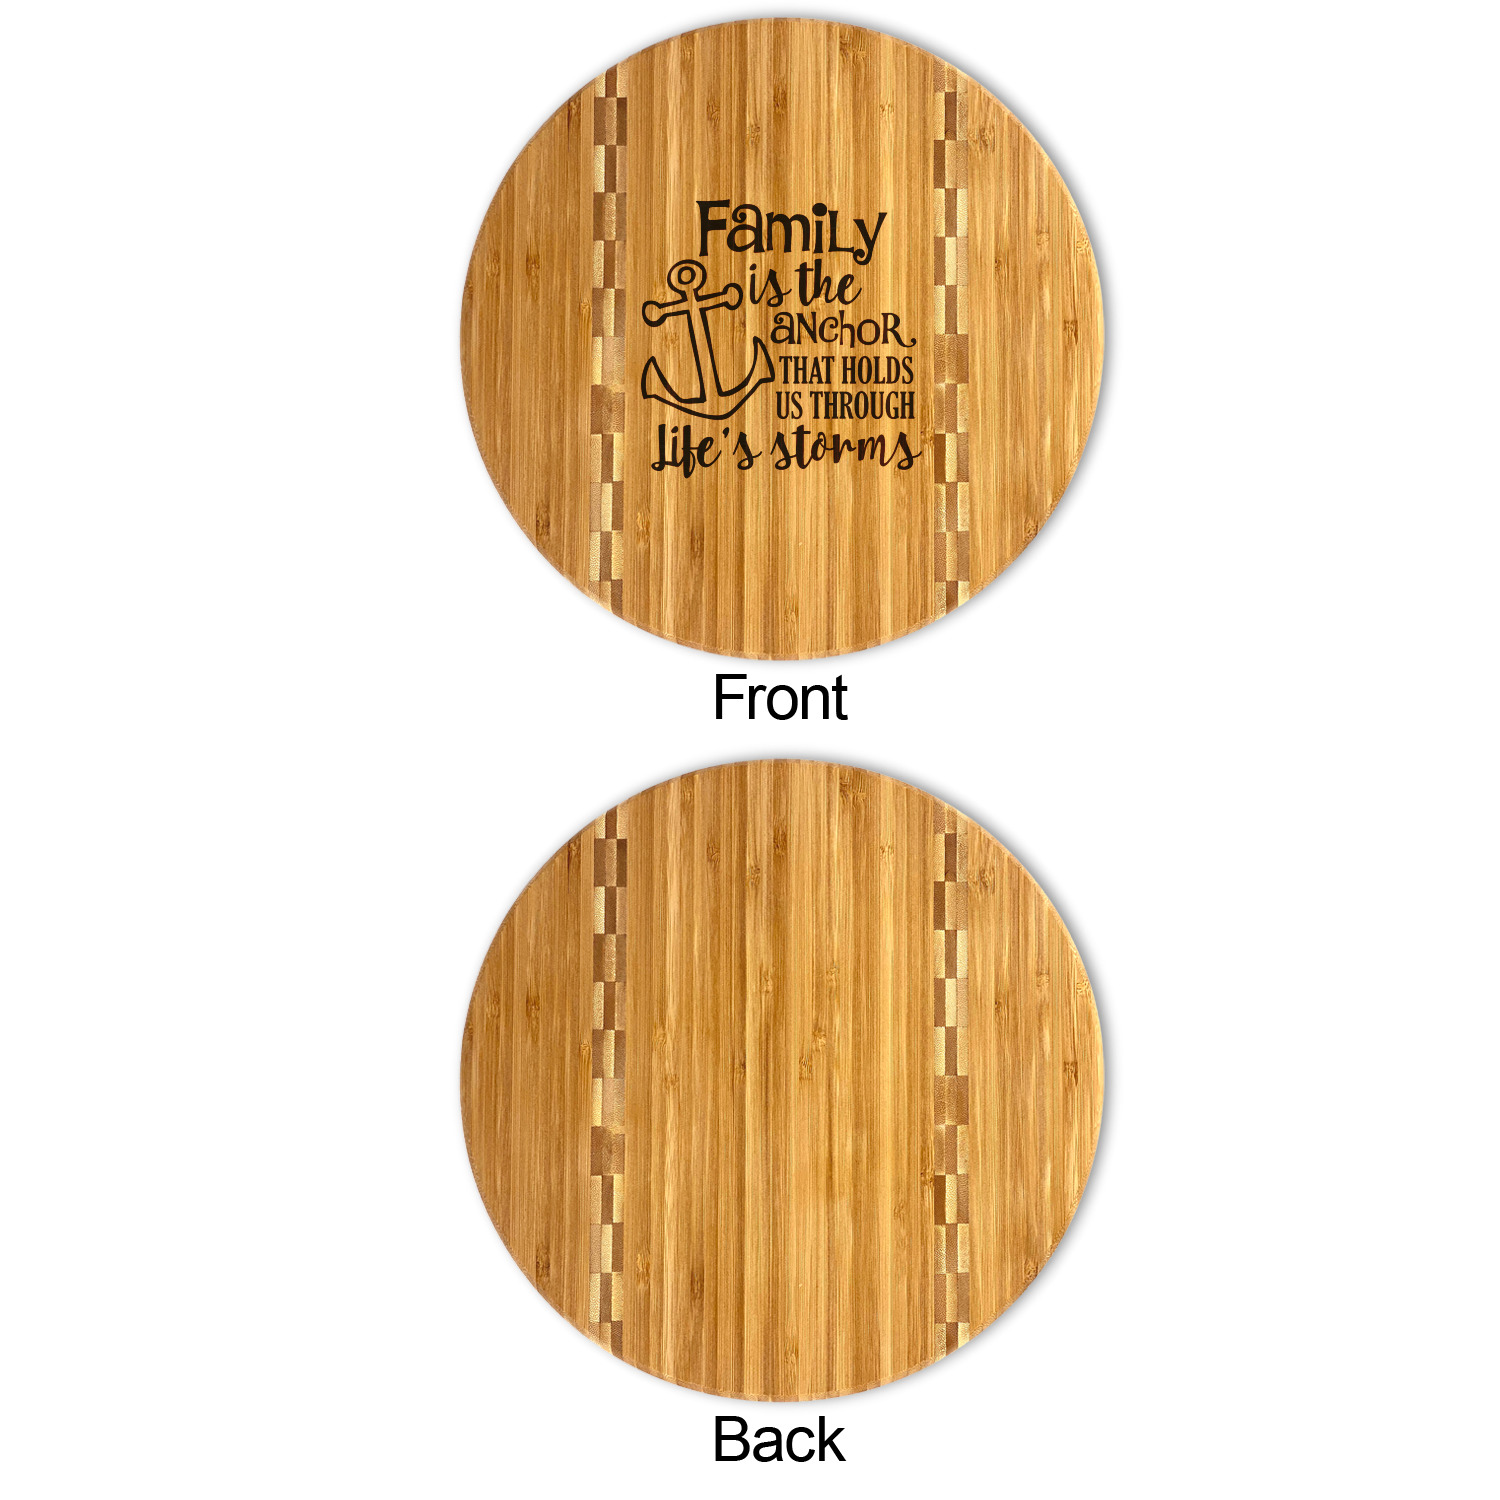 Personalized Bamboo Cutting Board Decor With Your Recipe or Saying